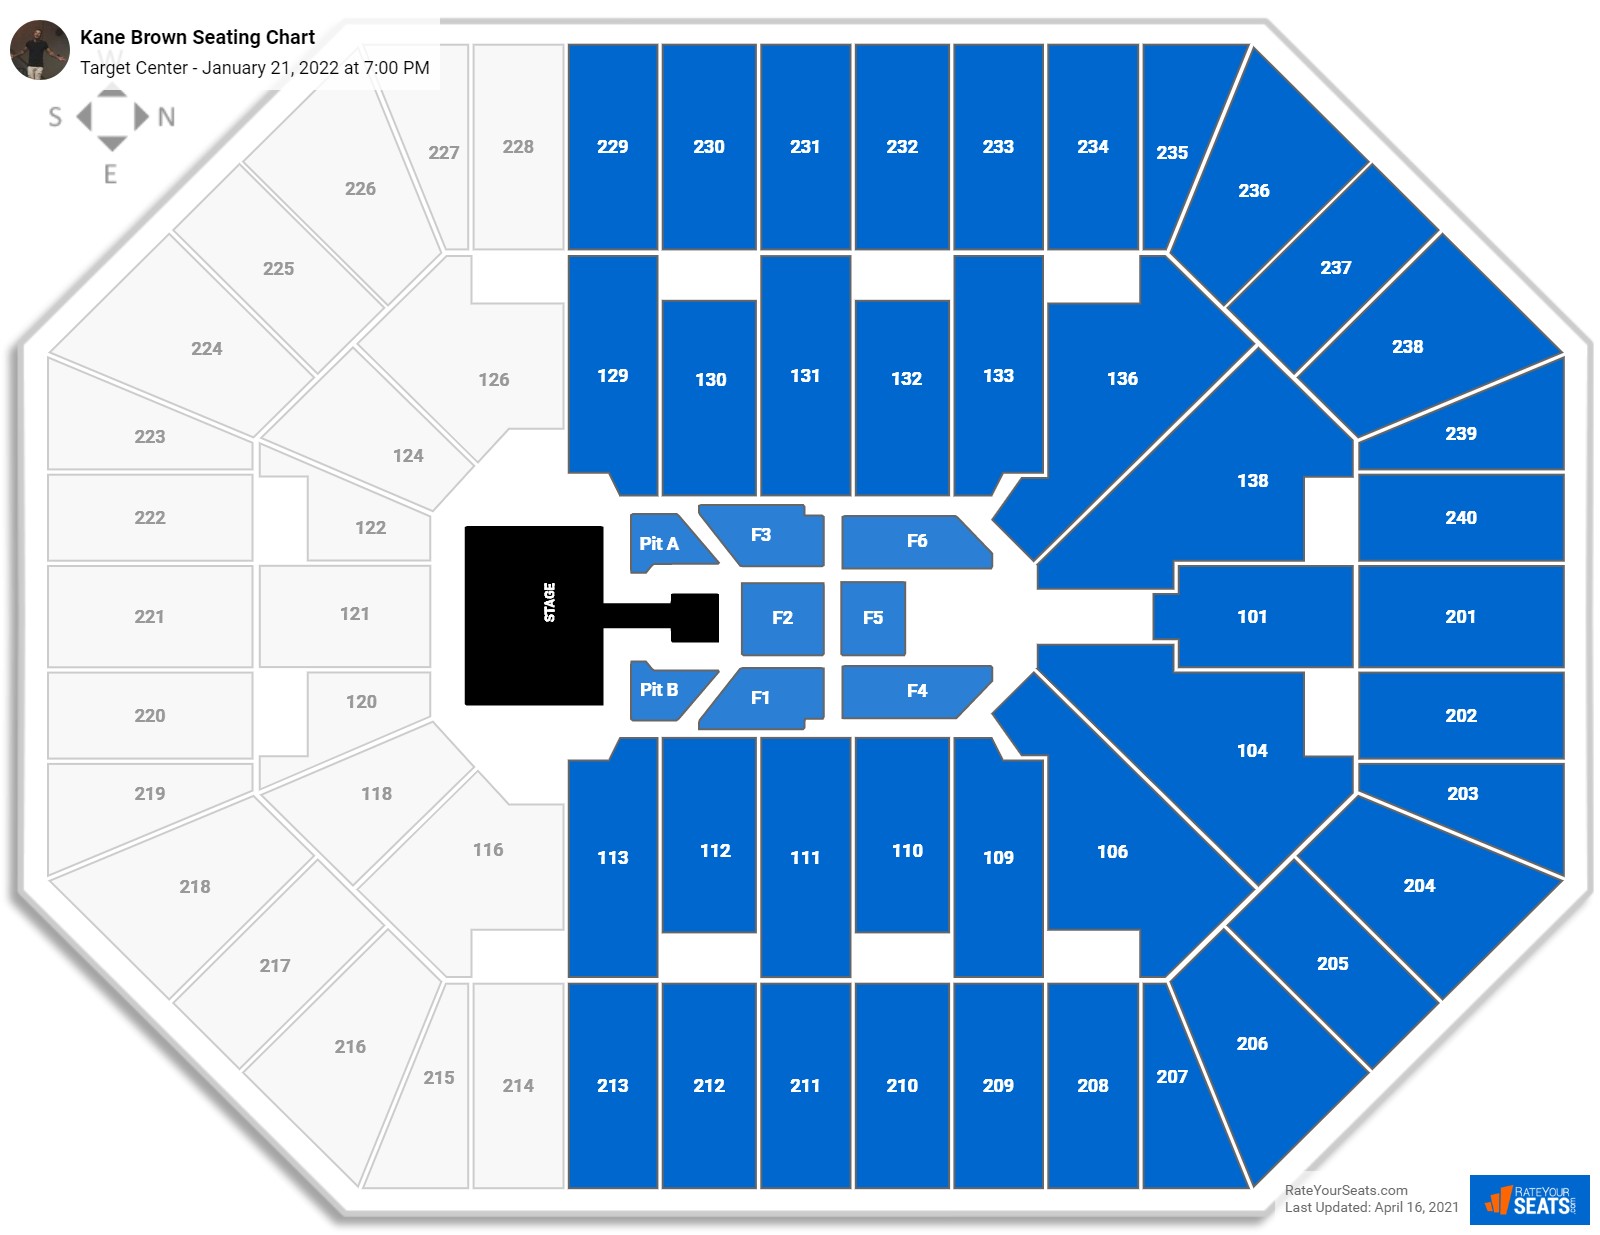 Target Center Seating Charts for Concerts RateYourSeats com